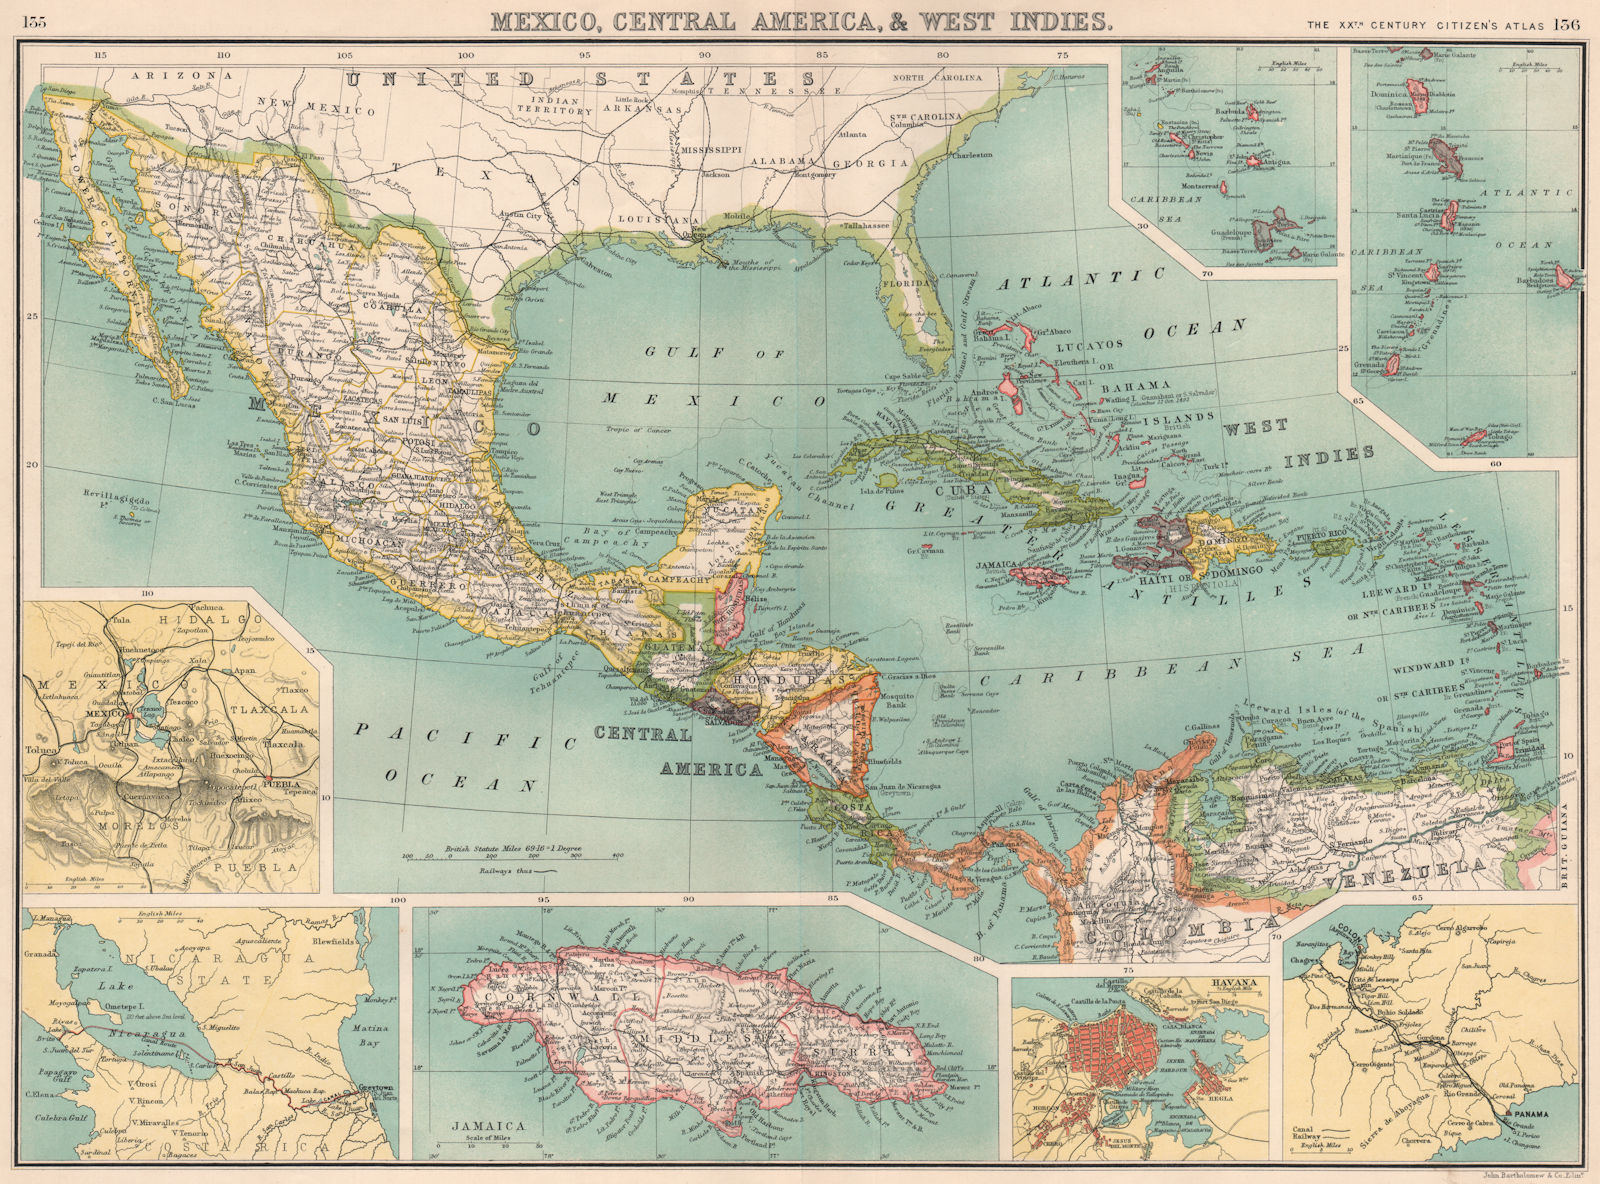 MEXICO CENTRAL AMERICA WEST INDIES. Panama & Proposed Nicaragua canal 1901 map